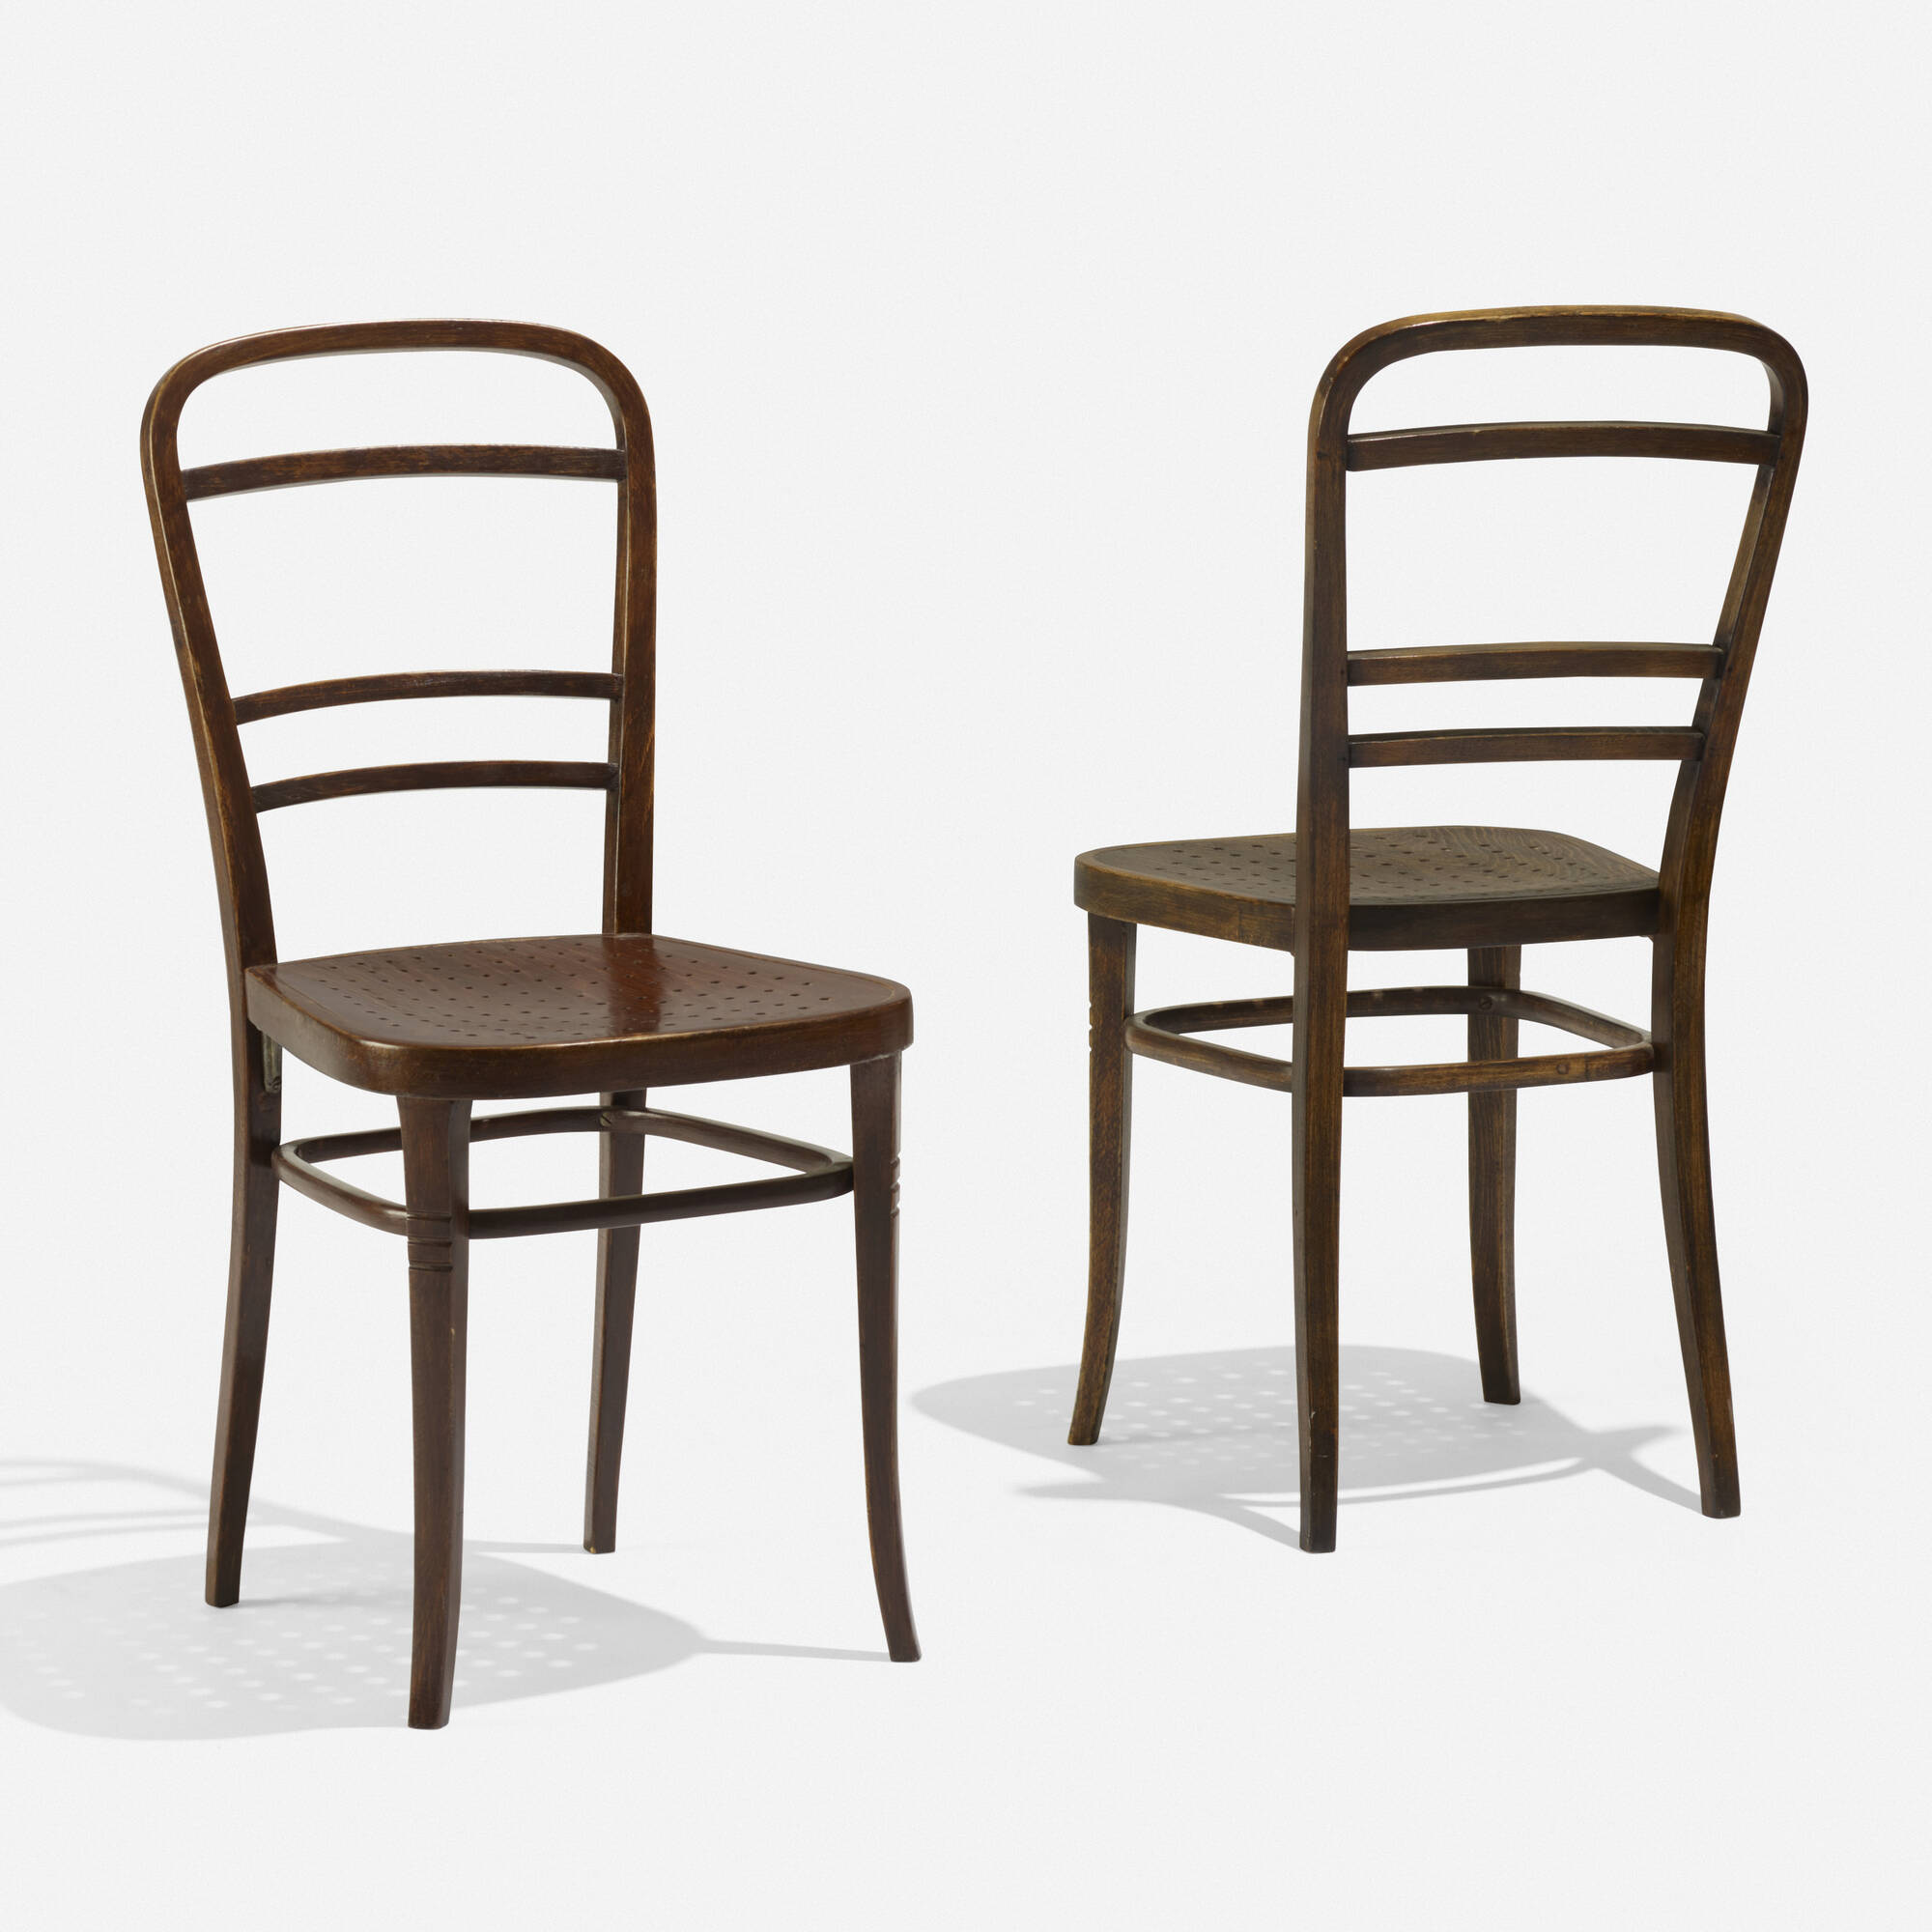 Rust uit ontbijt Versterken 156: OTTO WAGNER, chairs from the Postal Savings Bank, Vienna, pair <  International Style: The Boyd Collection, 7 November 2019 < Auctions |  Wright: Auctions of Art and Design